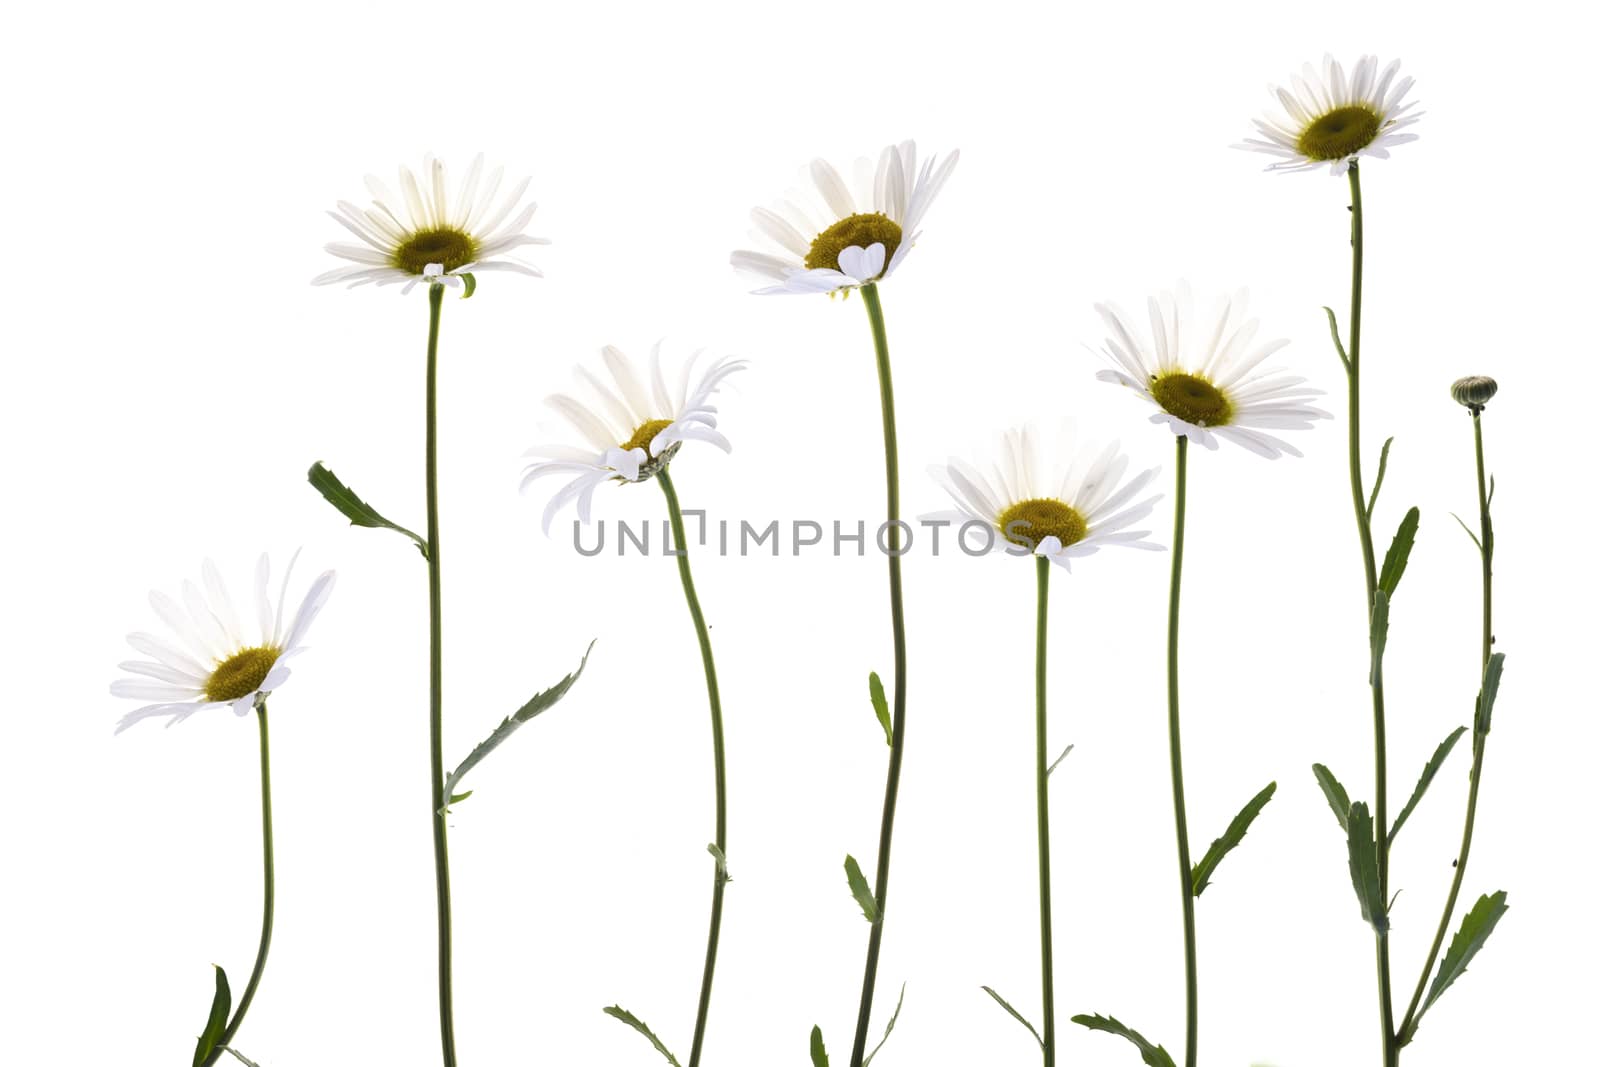 Various daisy flowers isolated on white background.